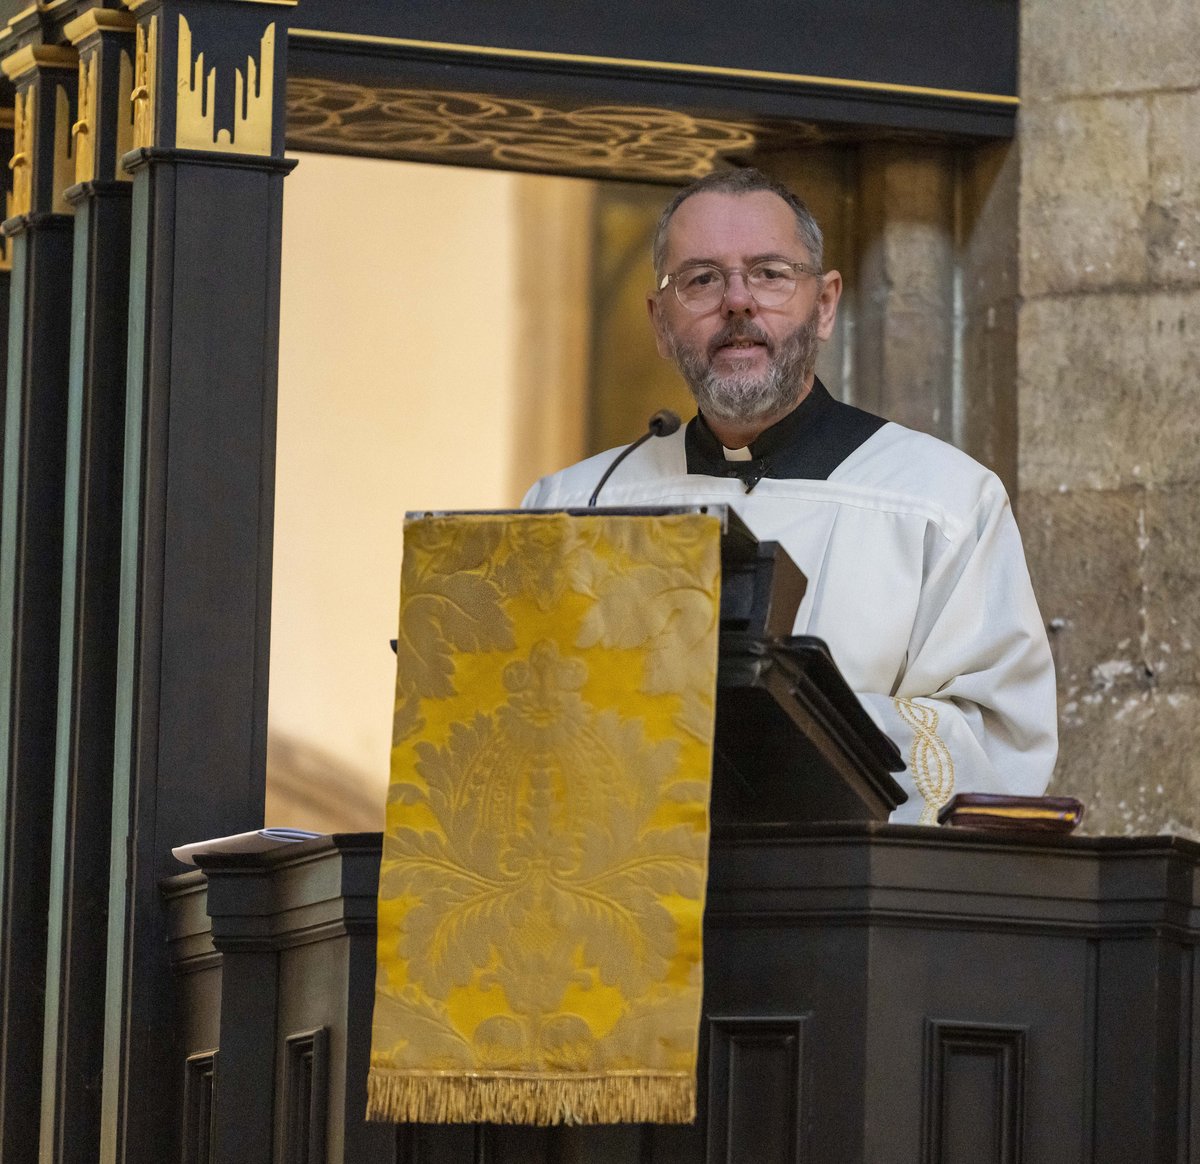 Dean of Llandaff Canon Richard Peers preaching from a pulpit